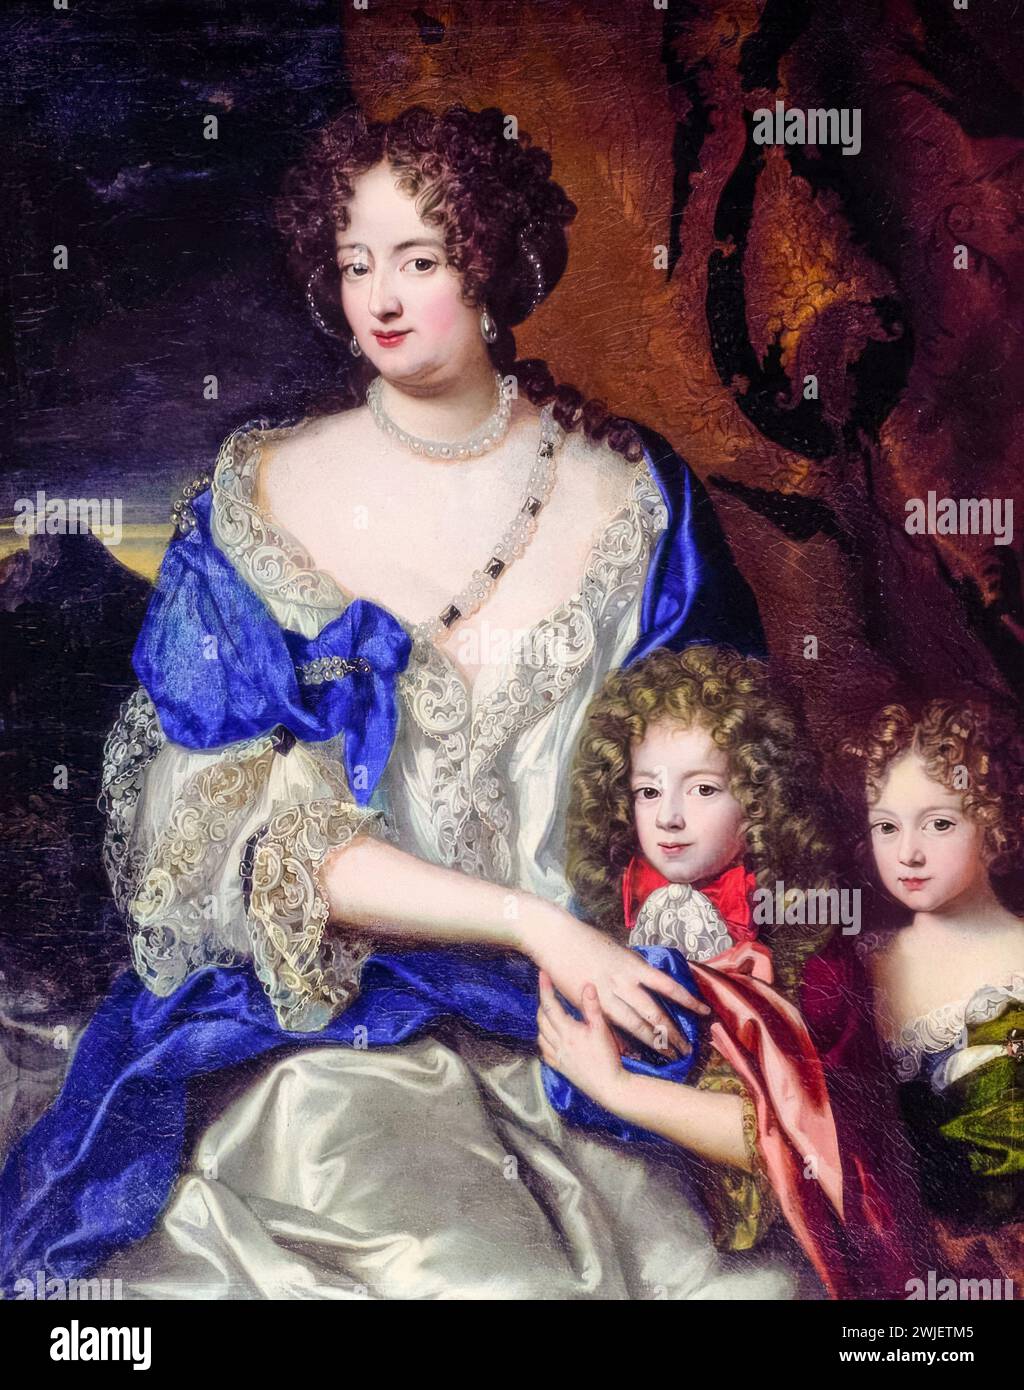 Sophia Dorothea of Celle (1666-1726), with her children Georg August (1683-1760, later King George II of Great Britain) and Sophie Dorothea (1687-1757, later Queen Sophie Dorothea of Prussia), portrait painting in oil on canvas by Jacques Vaillant, 1690-1691 Stock Photo